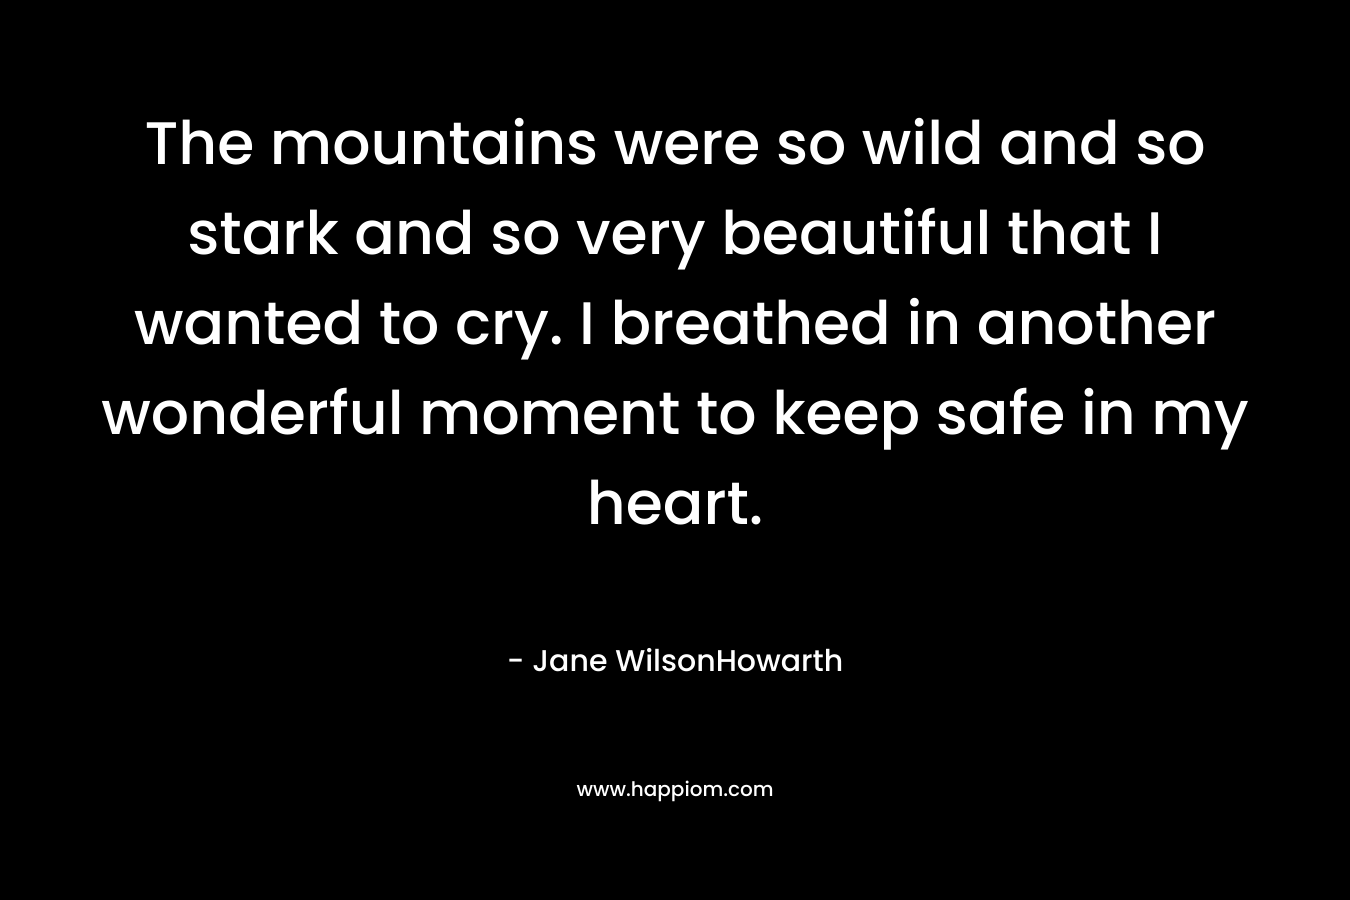 The mountains were so wild and so stark and so very beautiful that I wanted to cry. I breathed in another wonderful moment to keep safe in my heart. – Jane WilsonHowarth